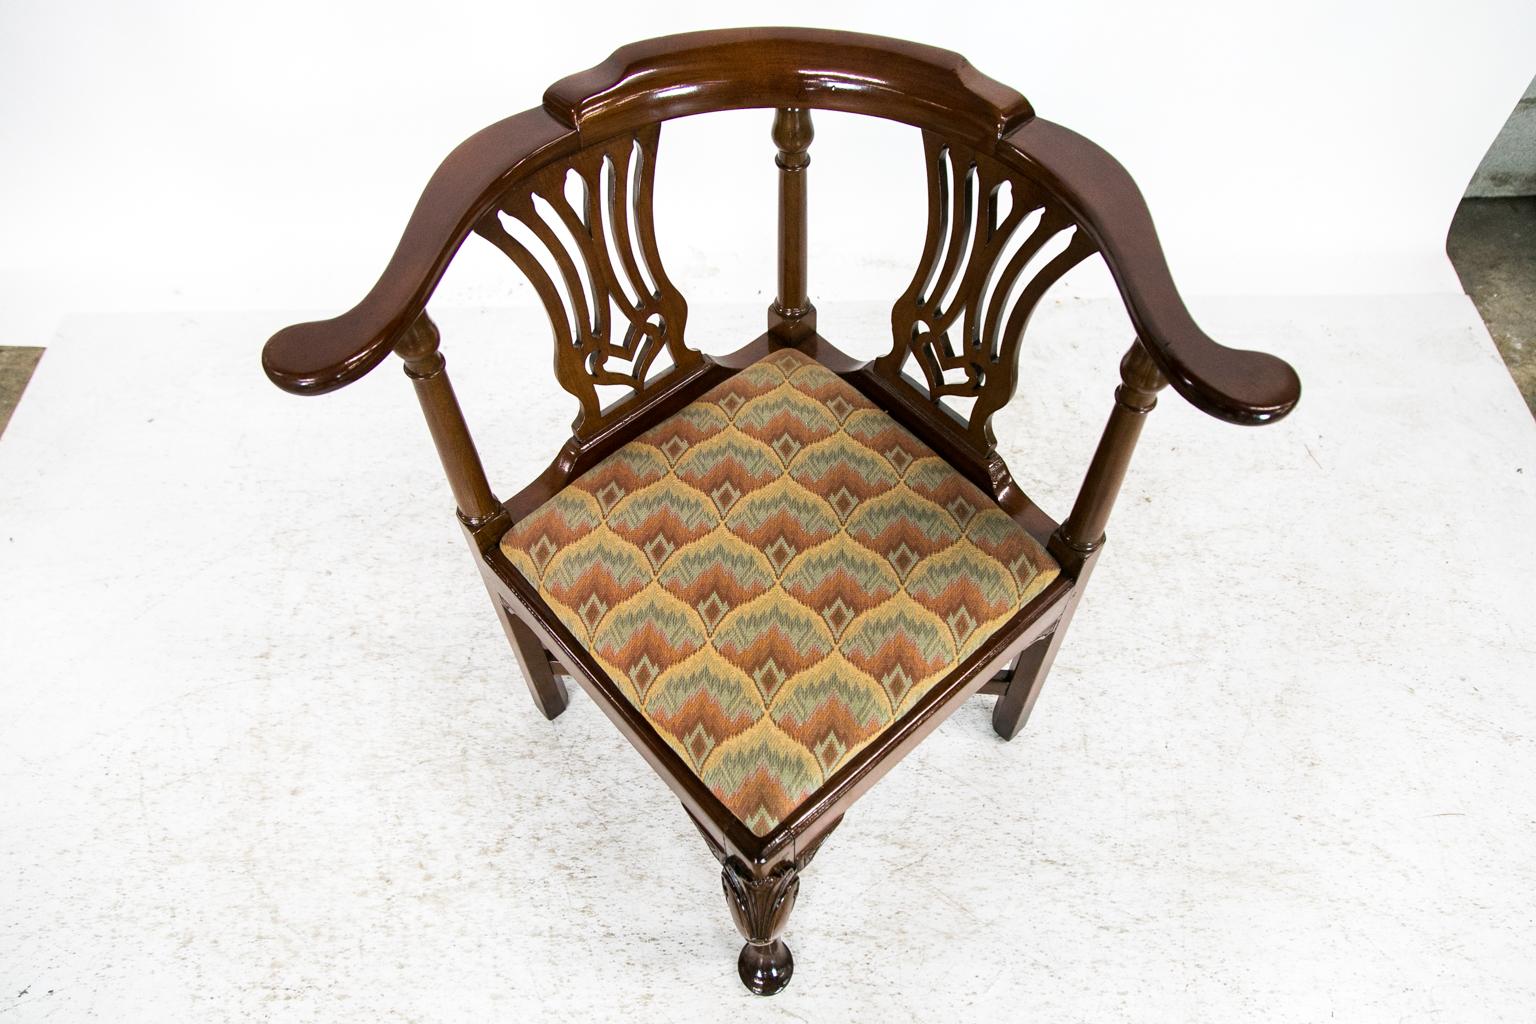 This corner chair has carved open splats. The apron has carved quarter fan brackets. The front legs have a carved stylized shell framed by volutes with single pendant bellflowers. The legs are joined by a cross stretcher. The front leg terminates in